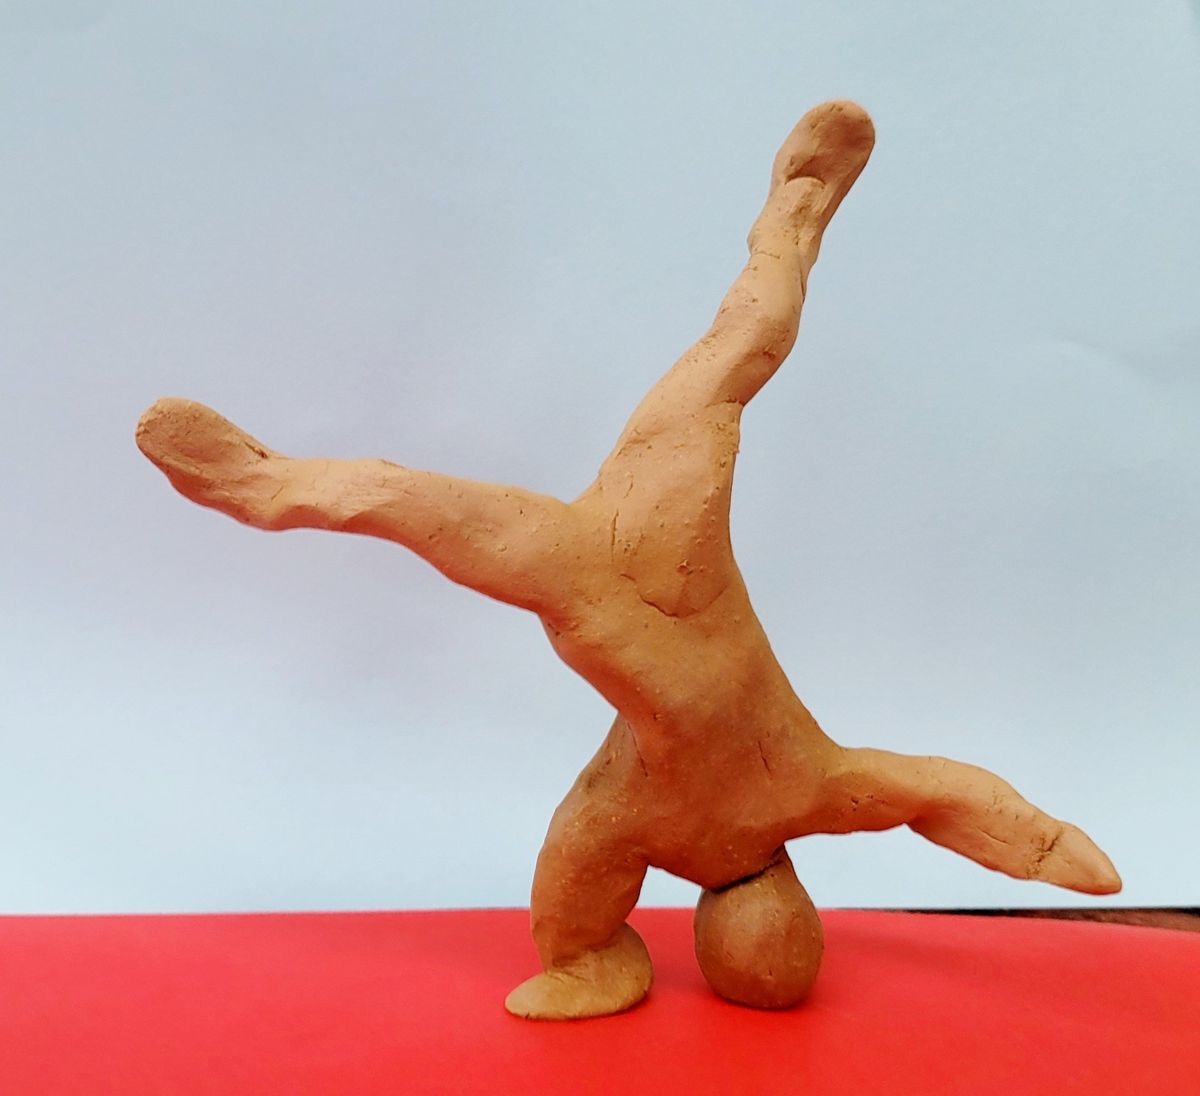 Clay gymnasts (Mudgee Library, ages 9-12)